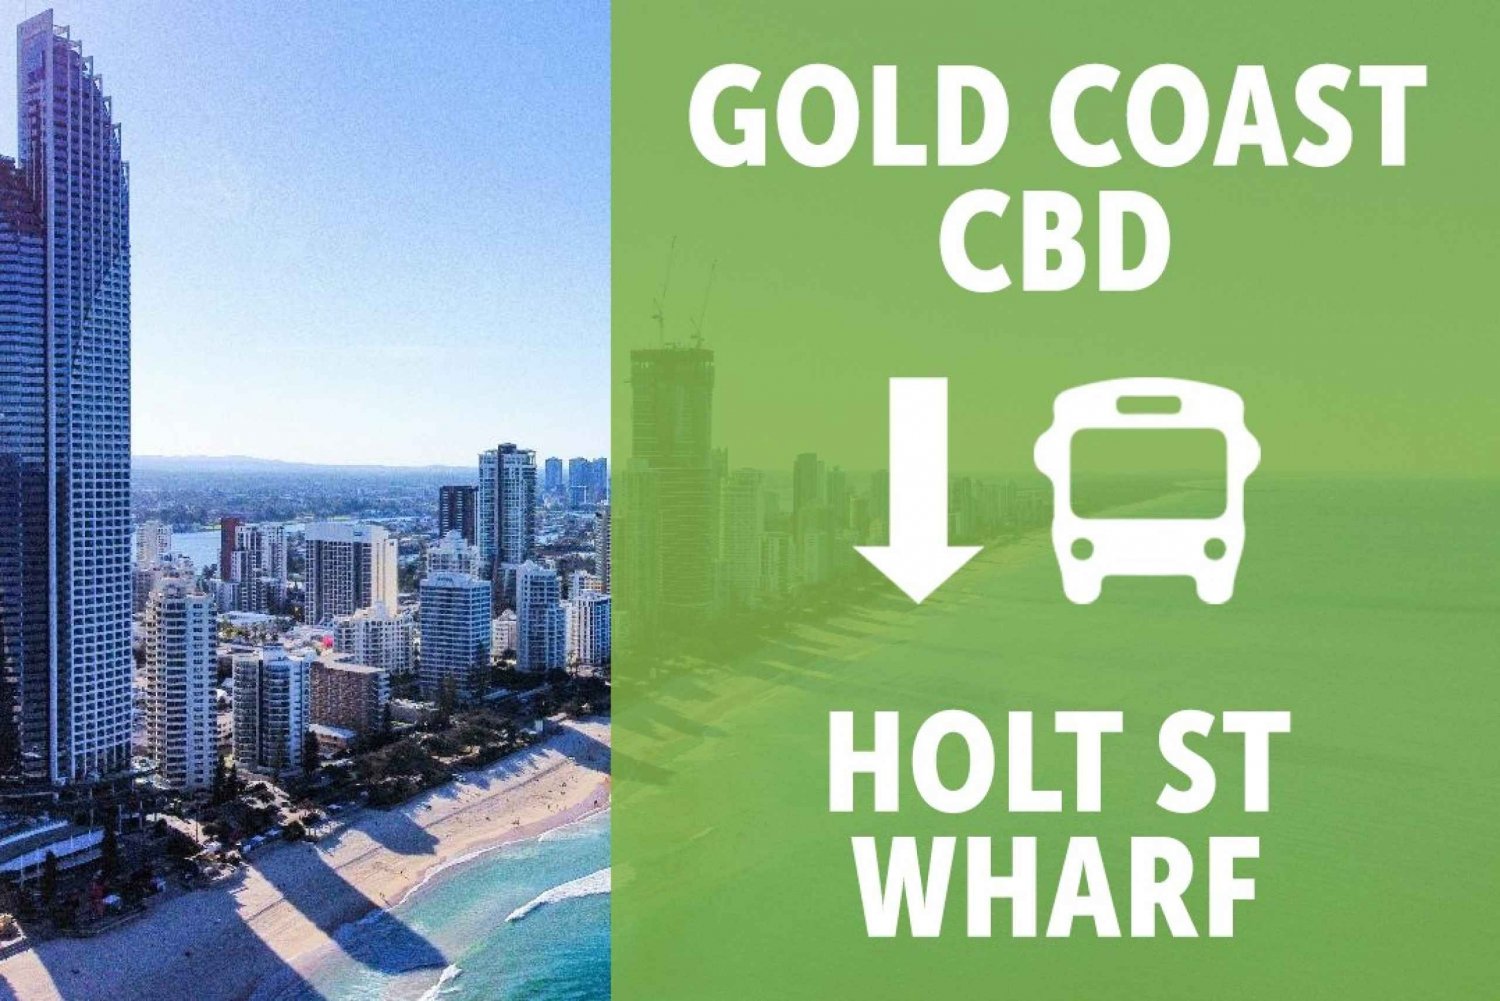 GOLD COAST: TANGALOOMA SHUTTLE FROM CBD TO HOLT ST WHARF